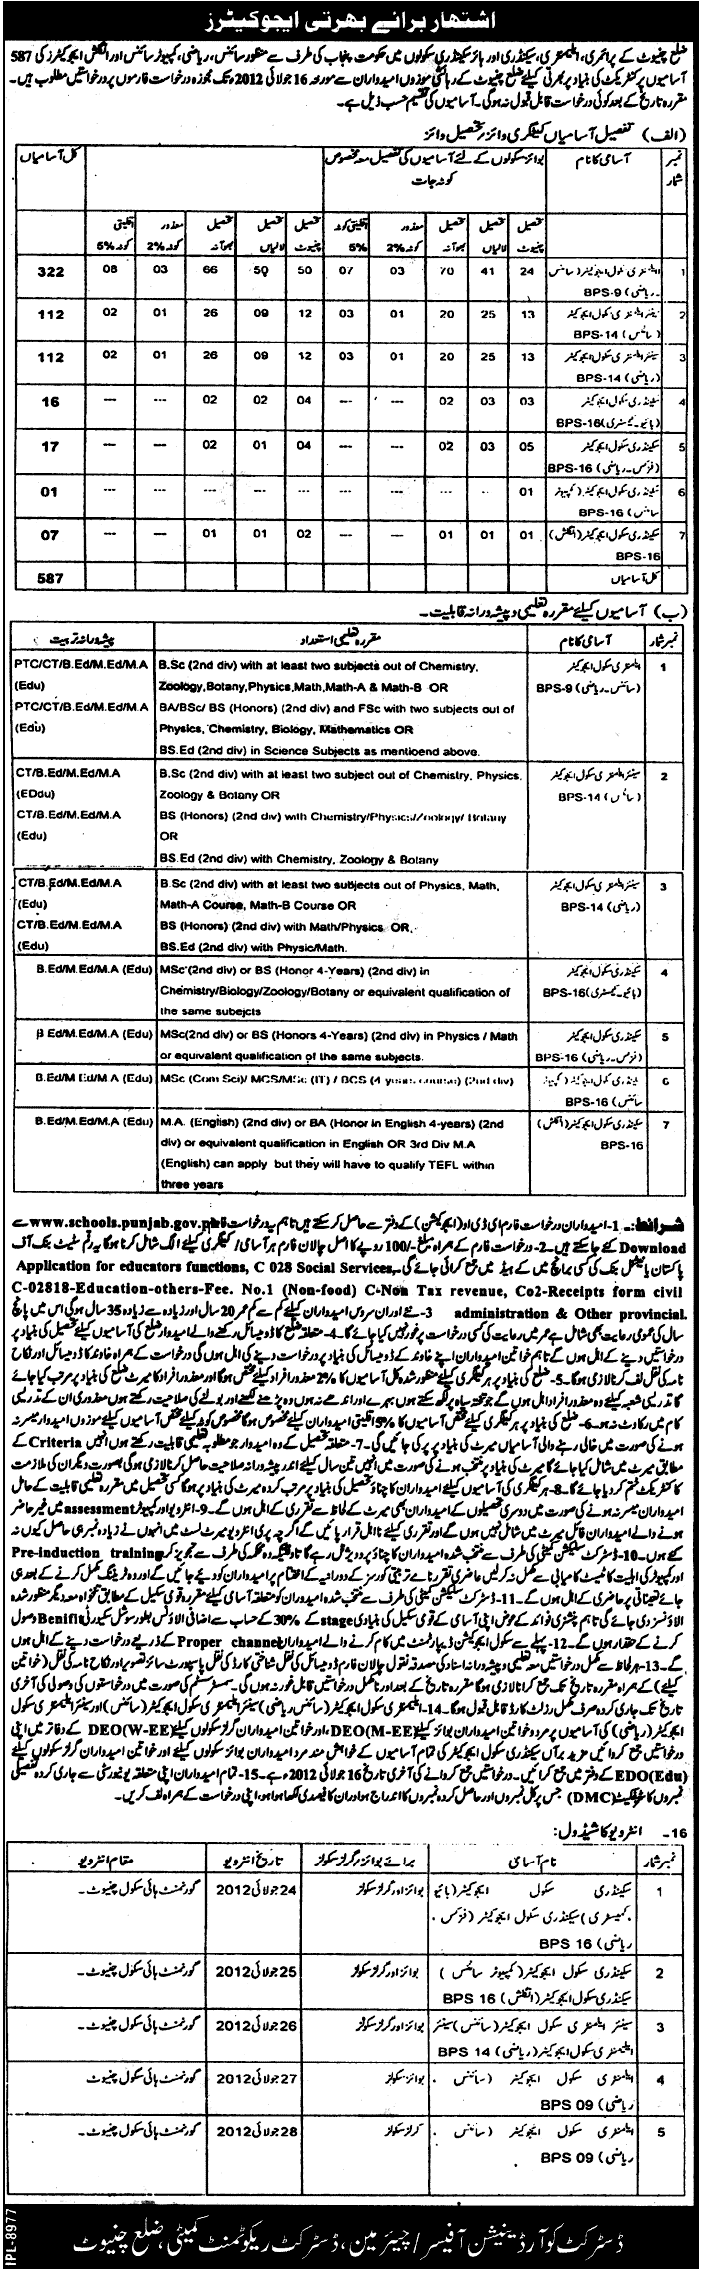 Teachers/Educators Required by Government of Punjab at Primary, Elementary, Secondary and Higher Secondary Schools (Chiniot District) (587 Vacancies) (Govt. Job)